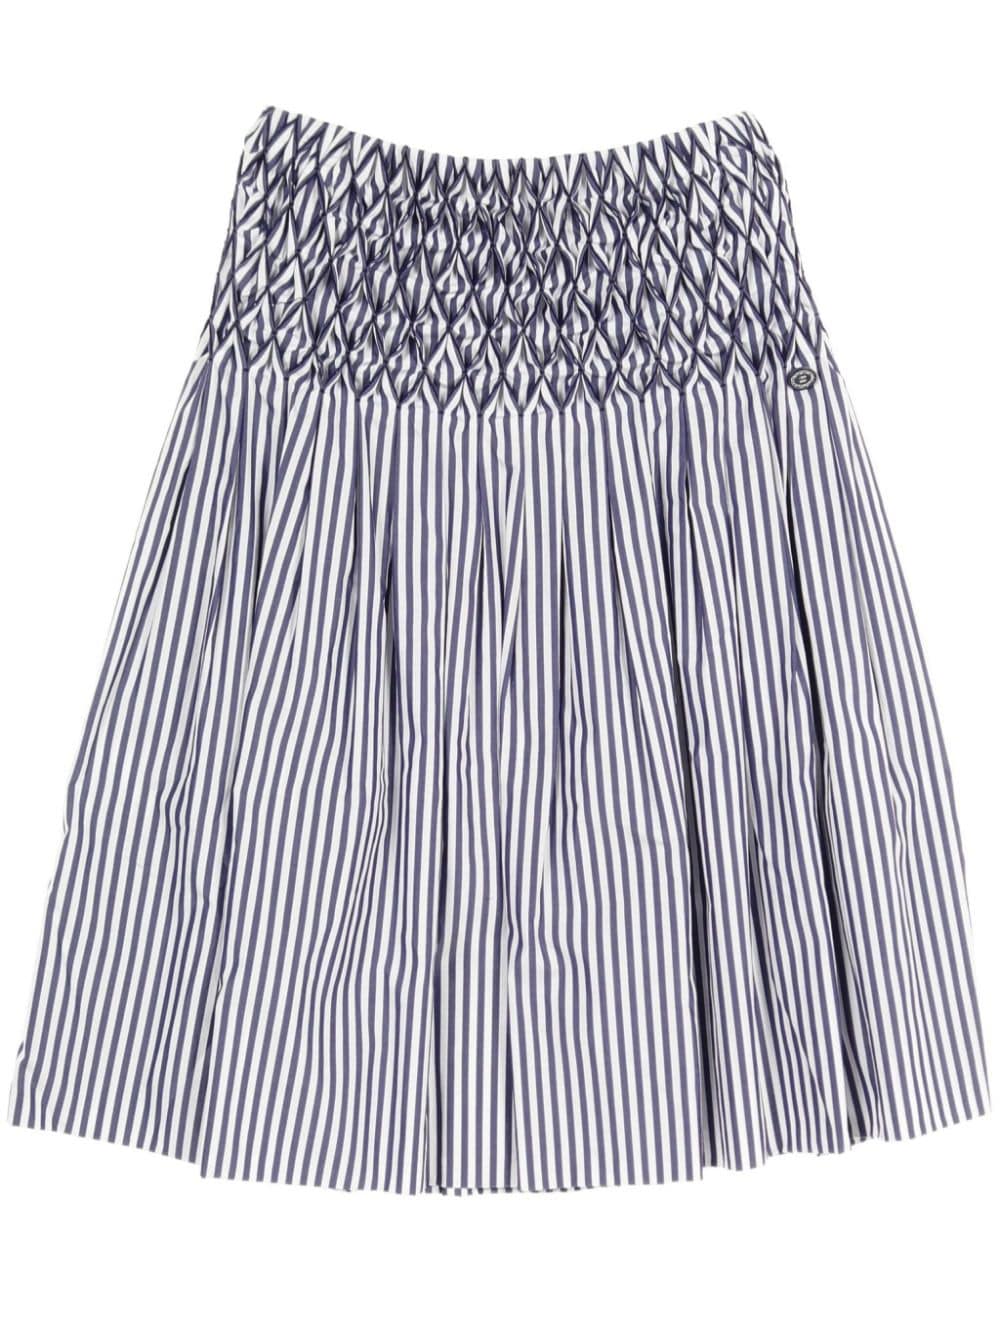 Image 1 of CHANEL Pre-Owned 1986-1988 striped midi skirt